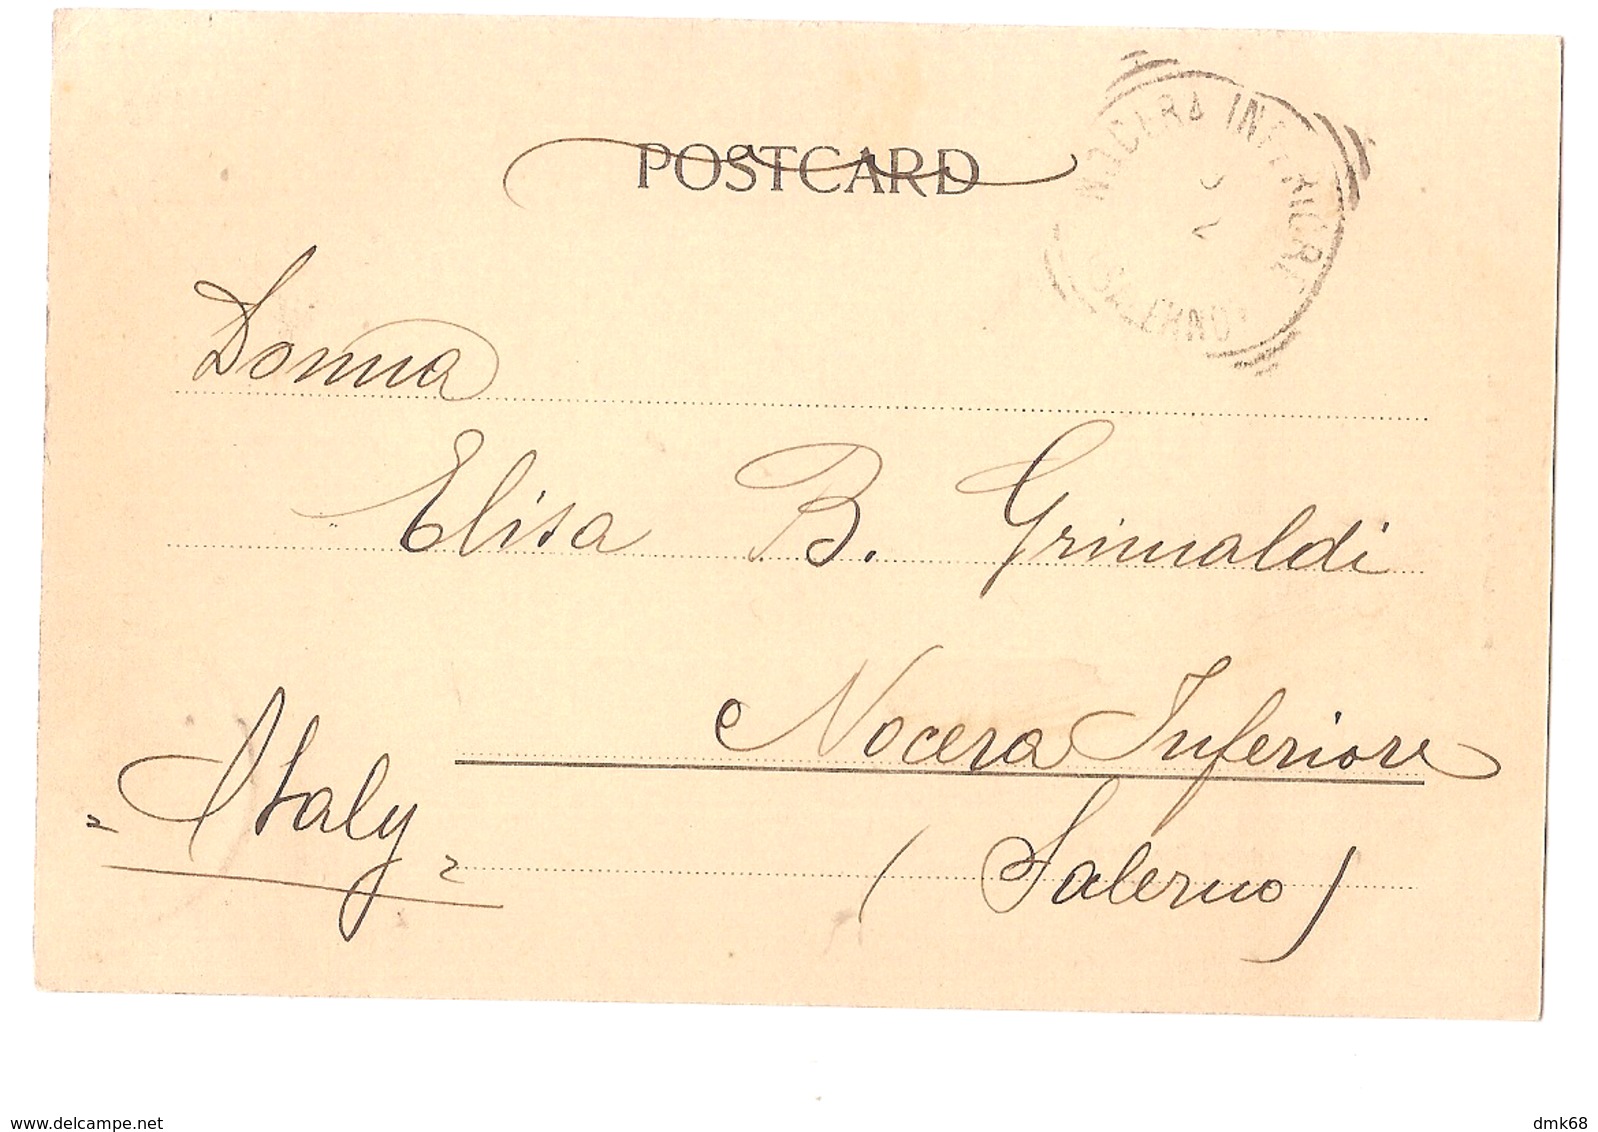 SOUTH AFRICA - JOHANNESBURG - COMMISSIONER STR. EAST - STAMP - MAILED TO NOCERA INFERIORE - EDIT BARNETT 1902 (2792) - South Africa